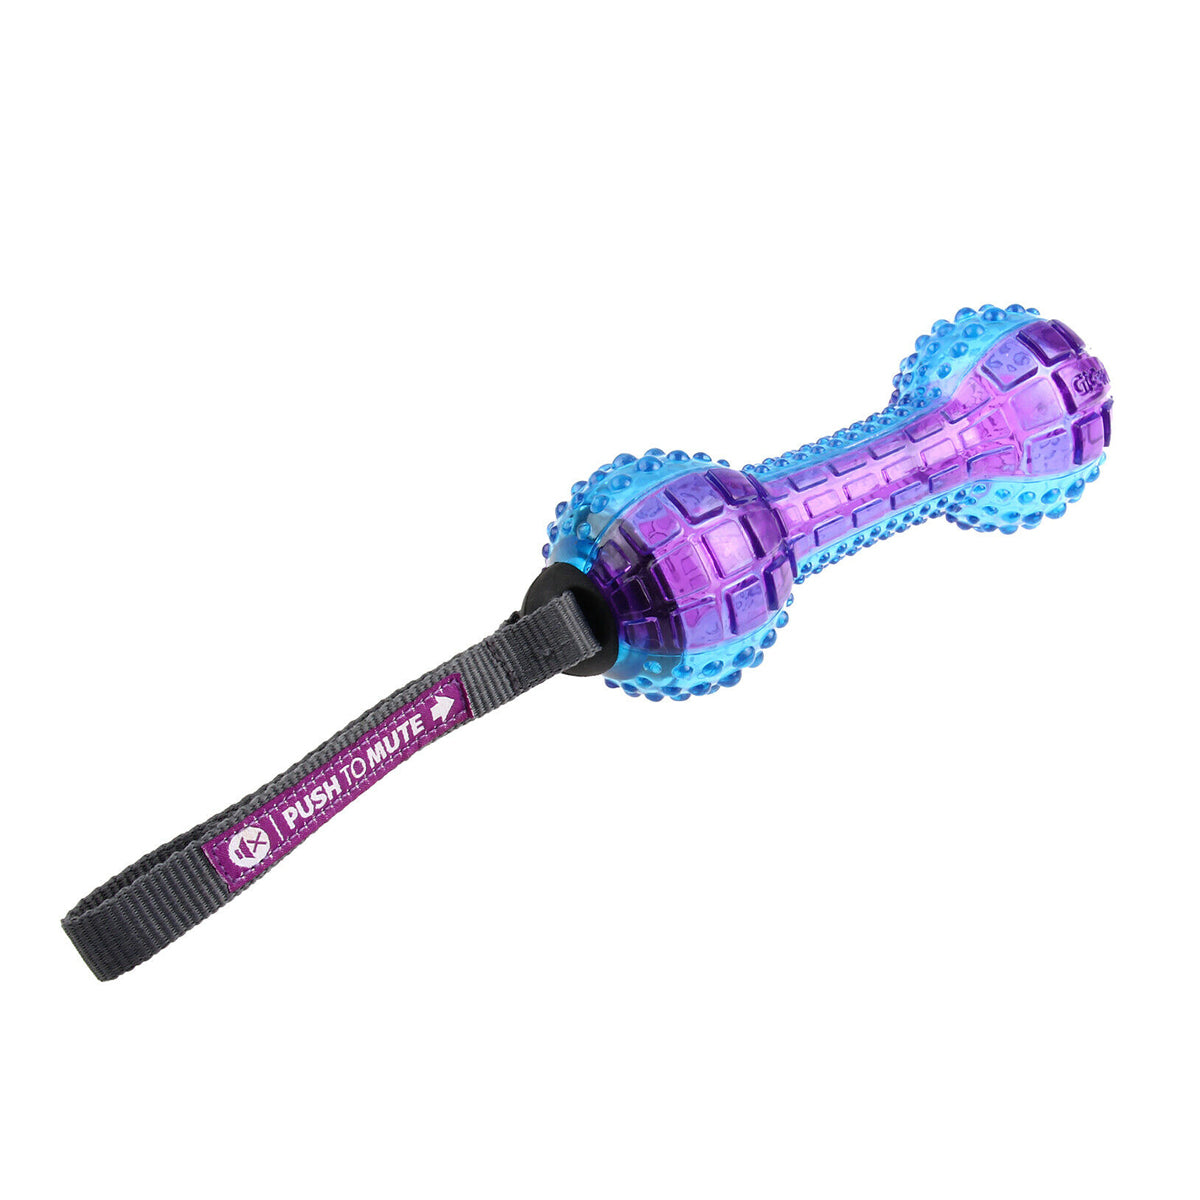 GIGWI Dumbell 'Push to Mute' Transparent (Purple/Blue)